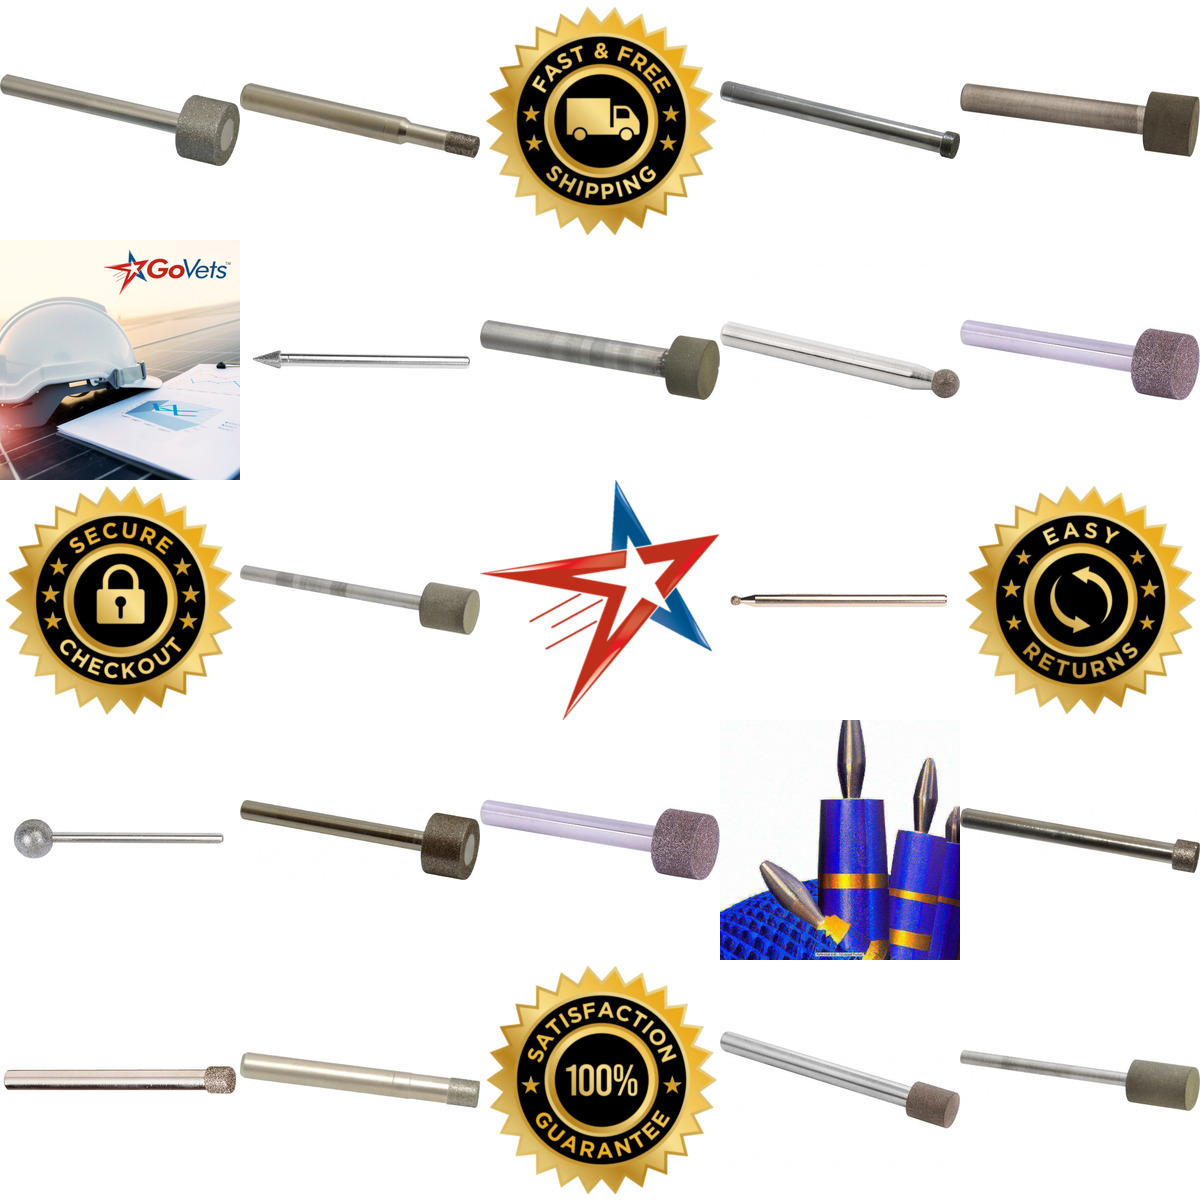 A selection of Grinding Pins products on GoVets